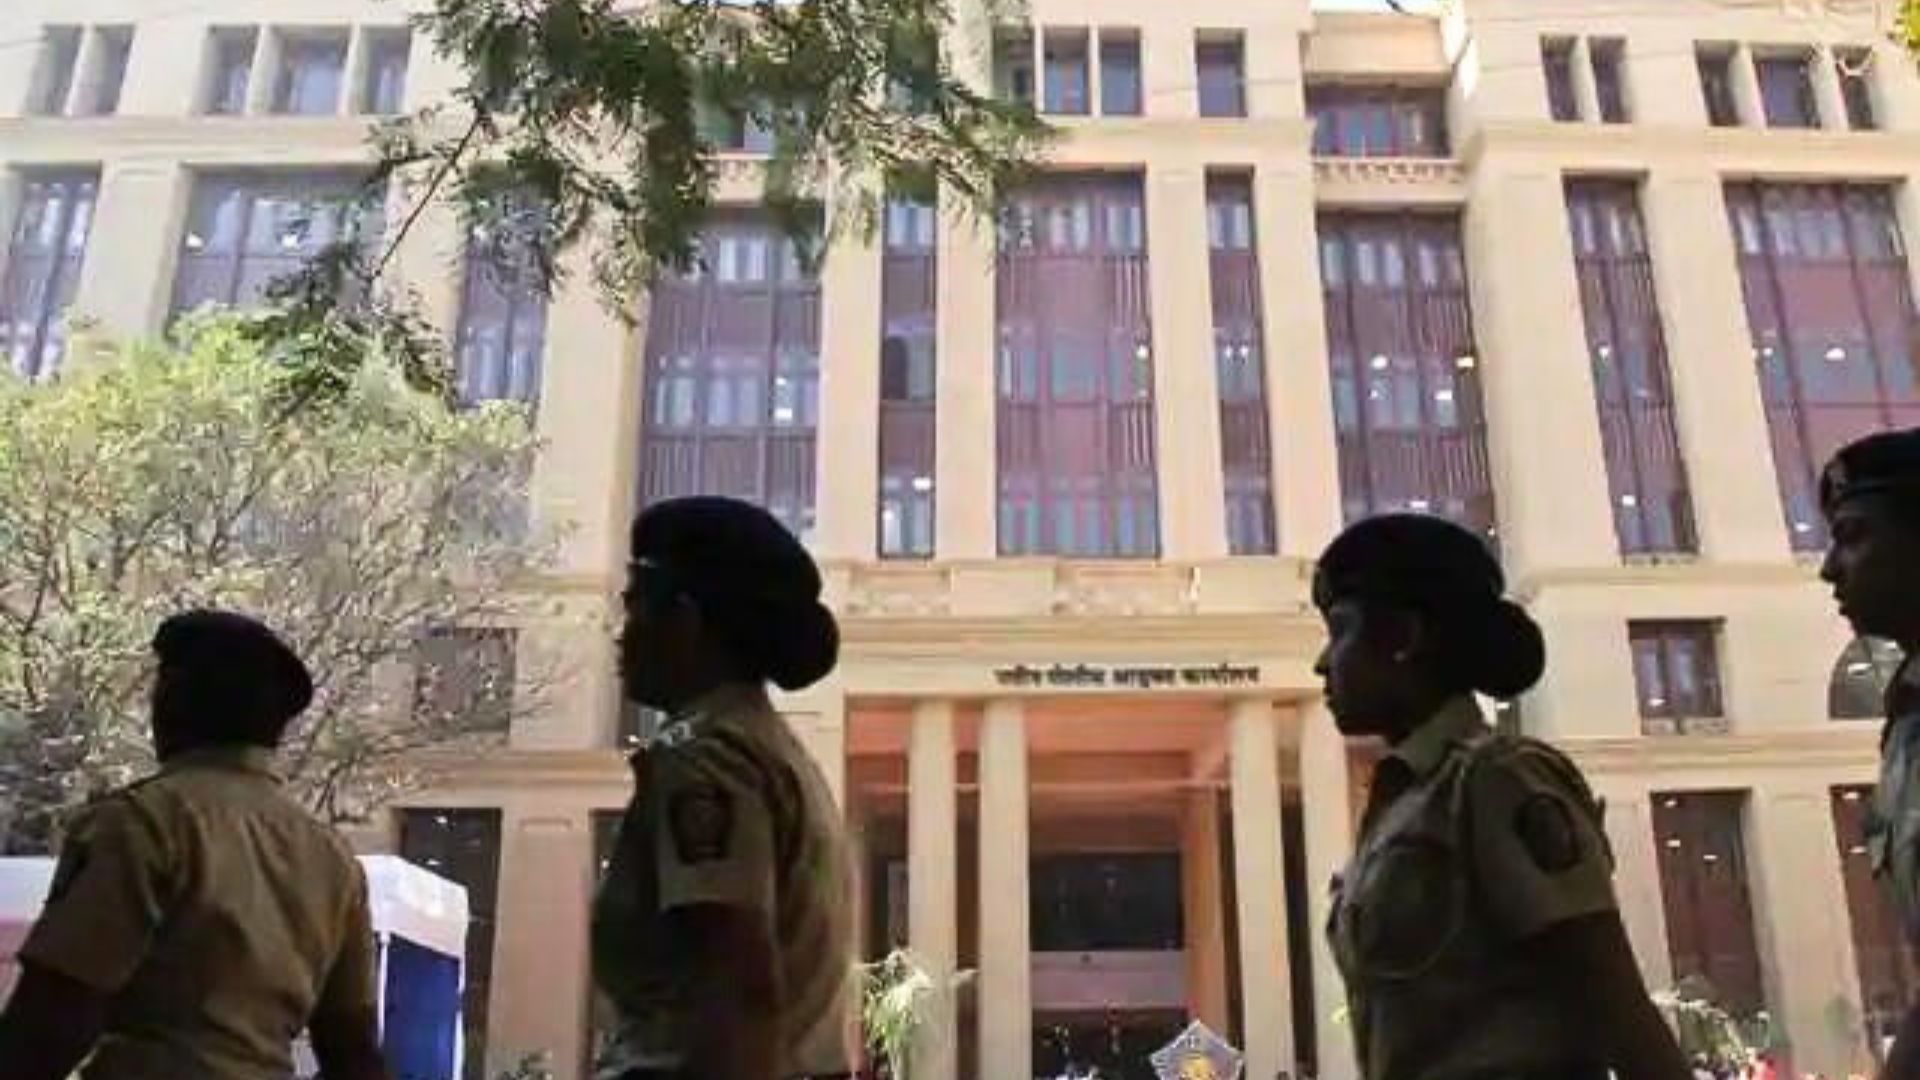 Mumbai police on alert after threat call about serial blasts